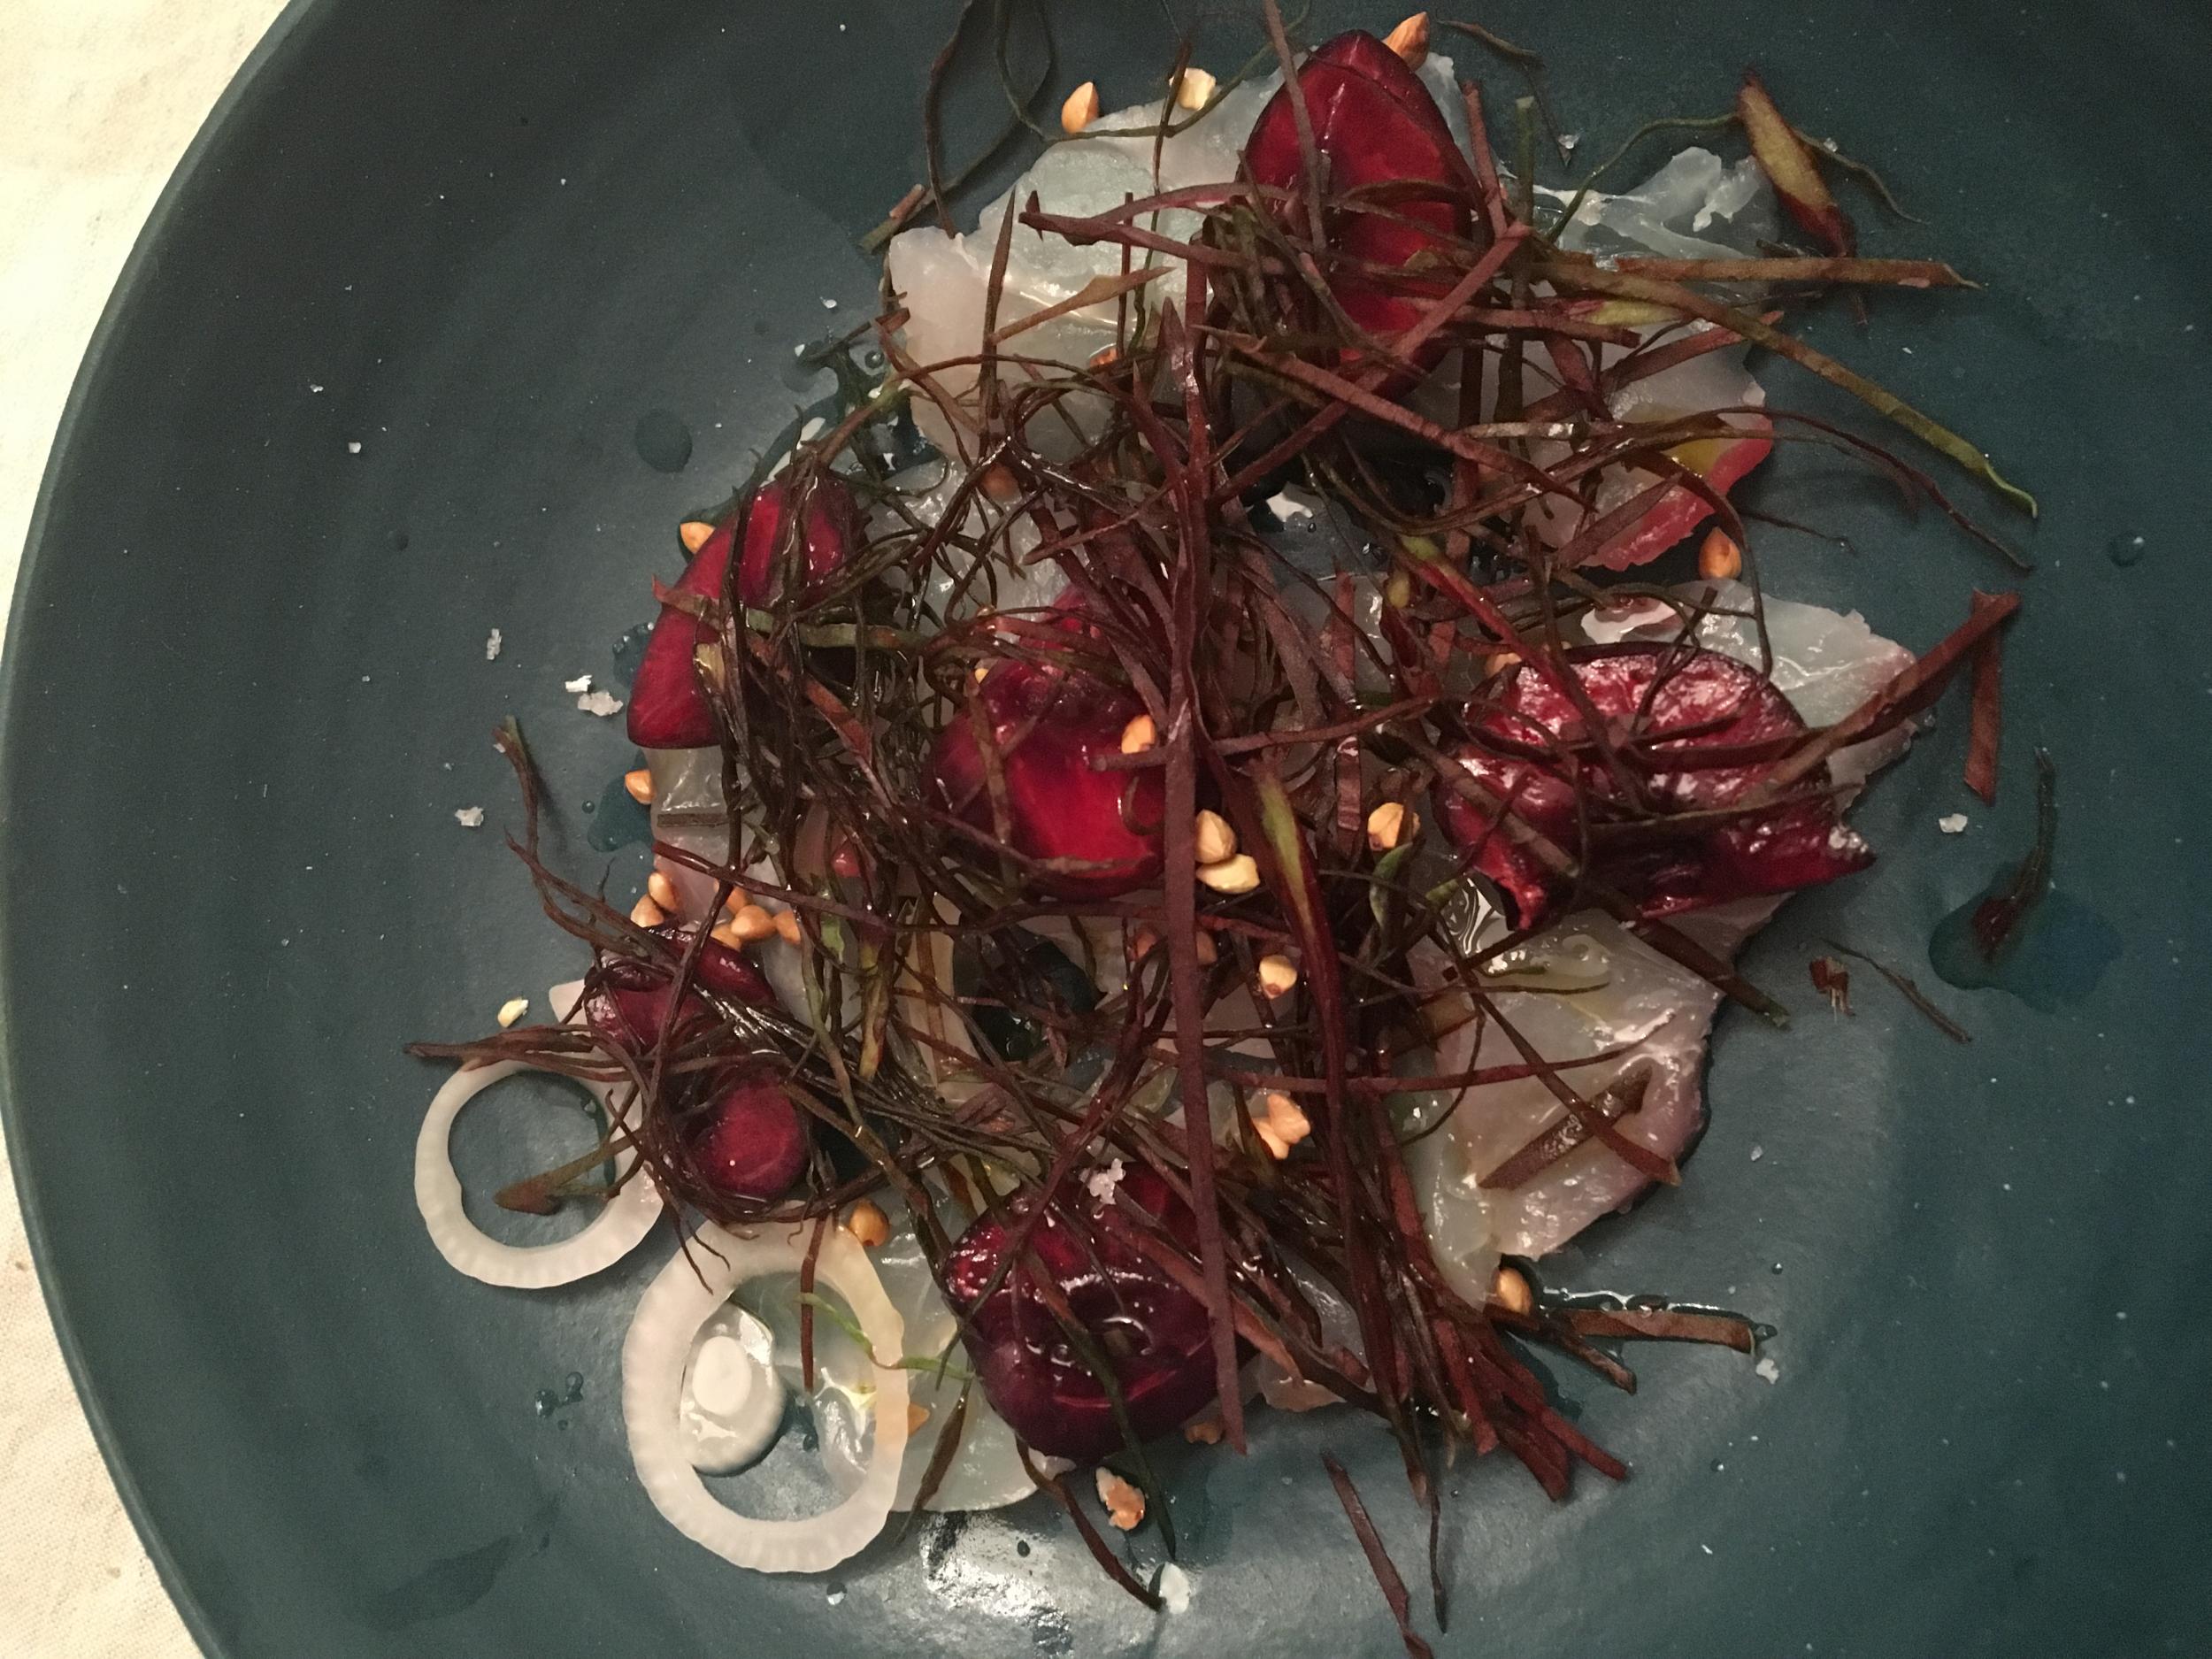 &#13;
Sven Chartier’s raw meagre fish with cherry and red sorrel &#13;